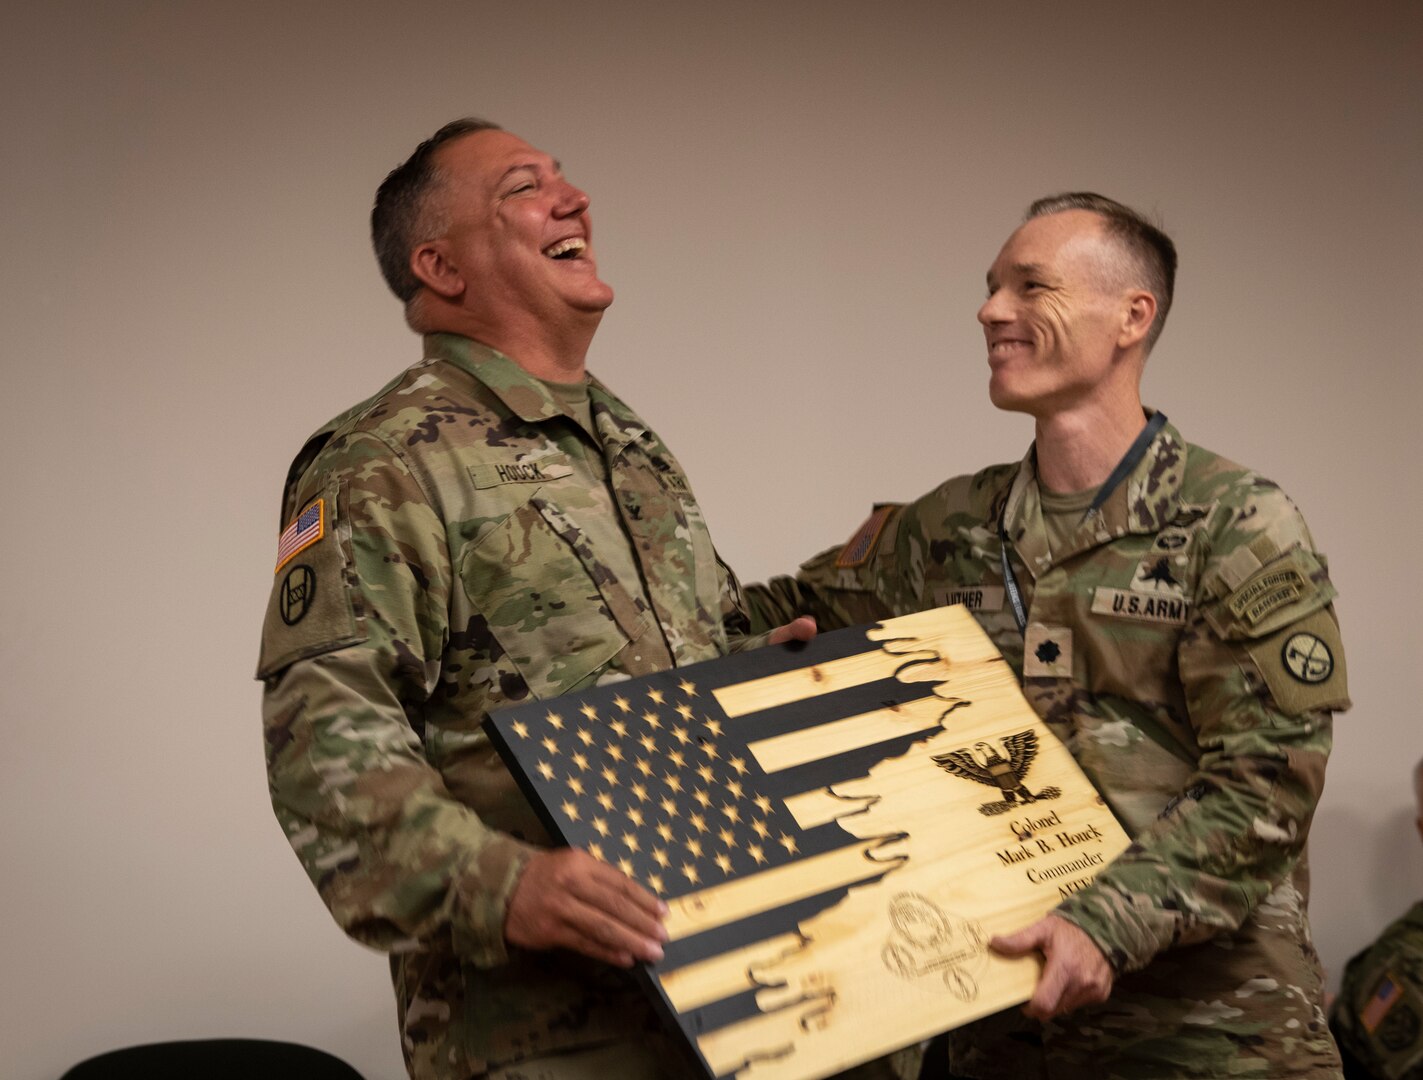 West Virginia Army National Guard Col. Mark B. Houck receives a gift of appreciation for his time as commander of the Army Interagency Training and Education Center (AITEC) from Lt. Col. Robert Luther during a ceremony at AITEC headquarters in St. Albans, West Virginia, Aug. 9, 2022. Houck relinquished command of AITEC to Lt. Col. Gina M. Nichols during the ceremony.